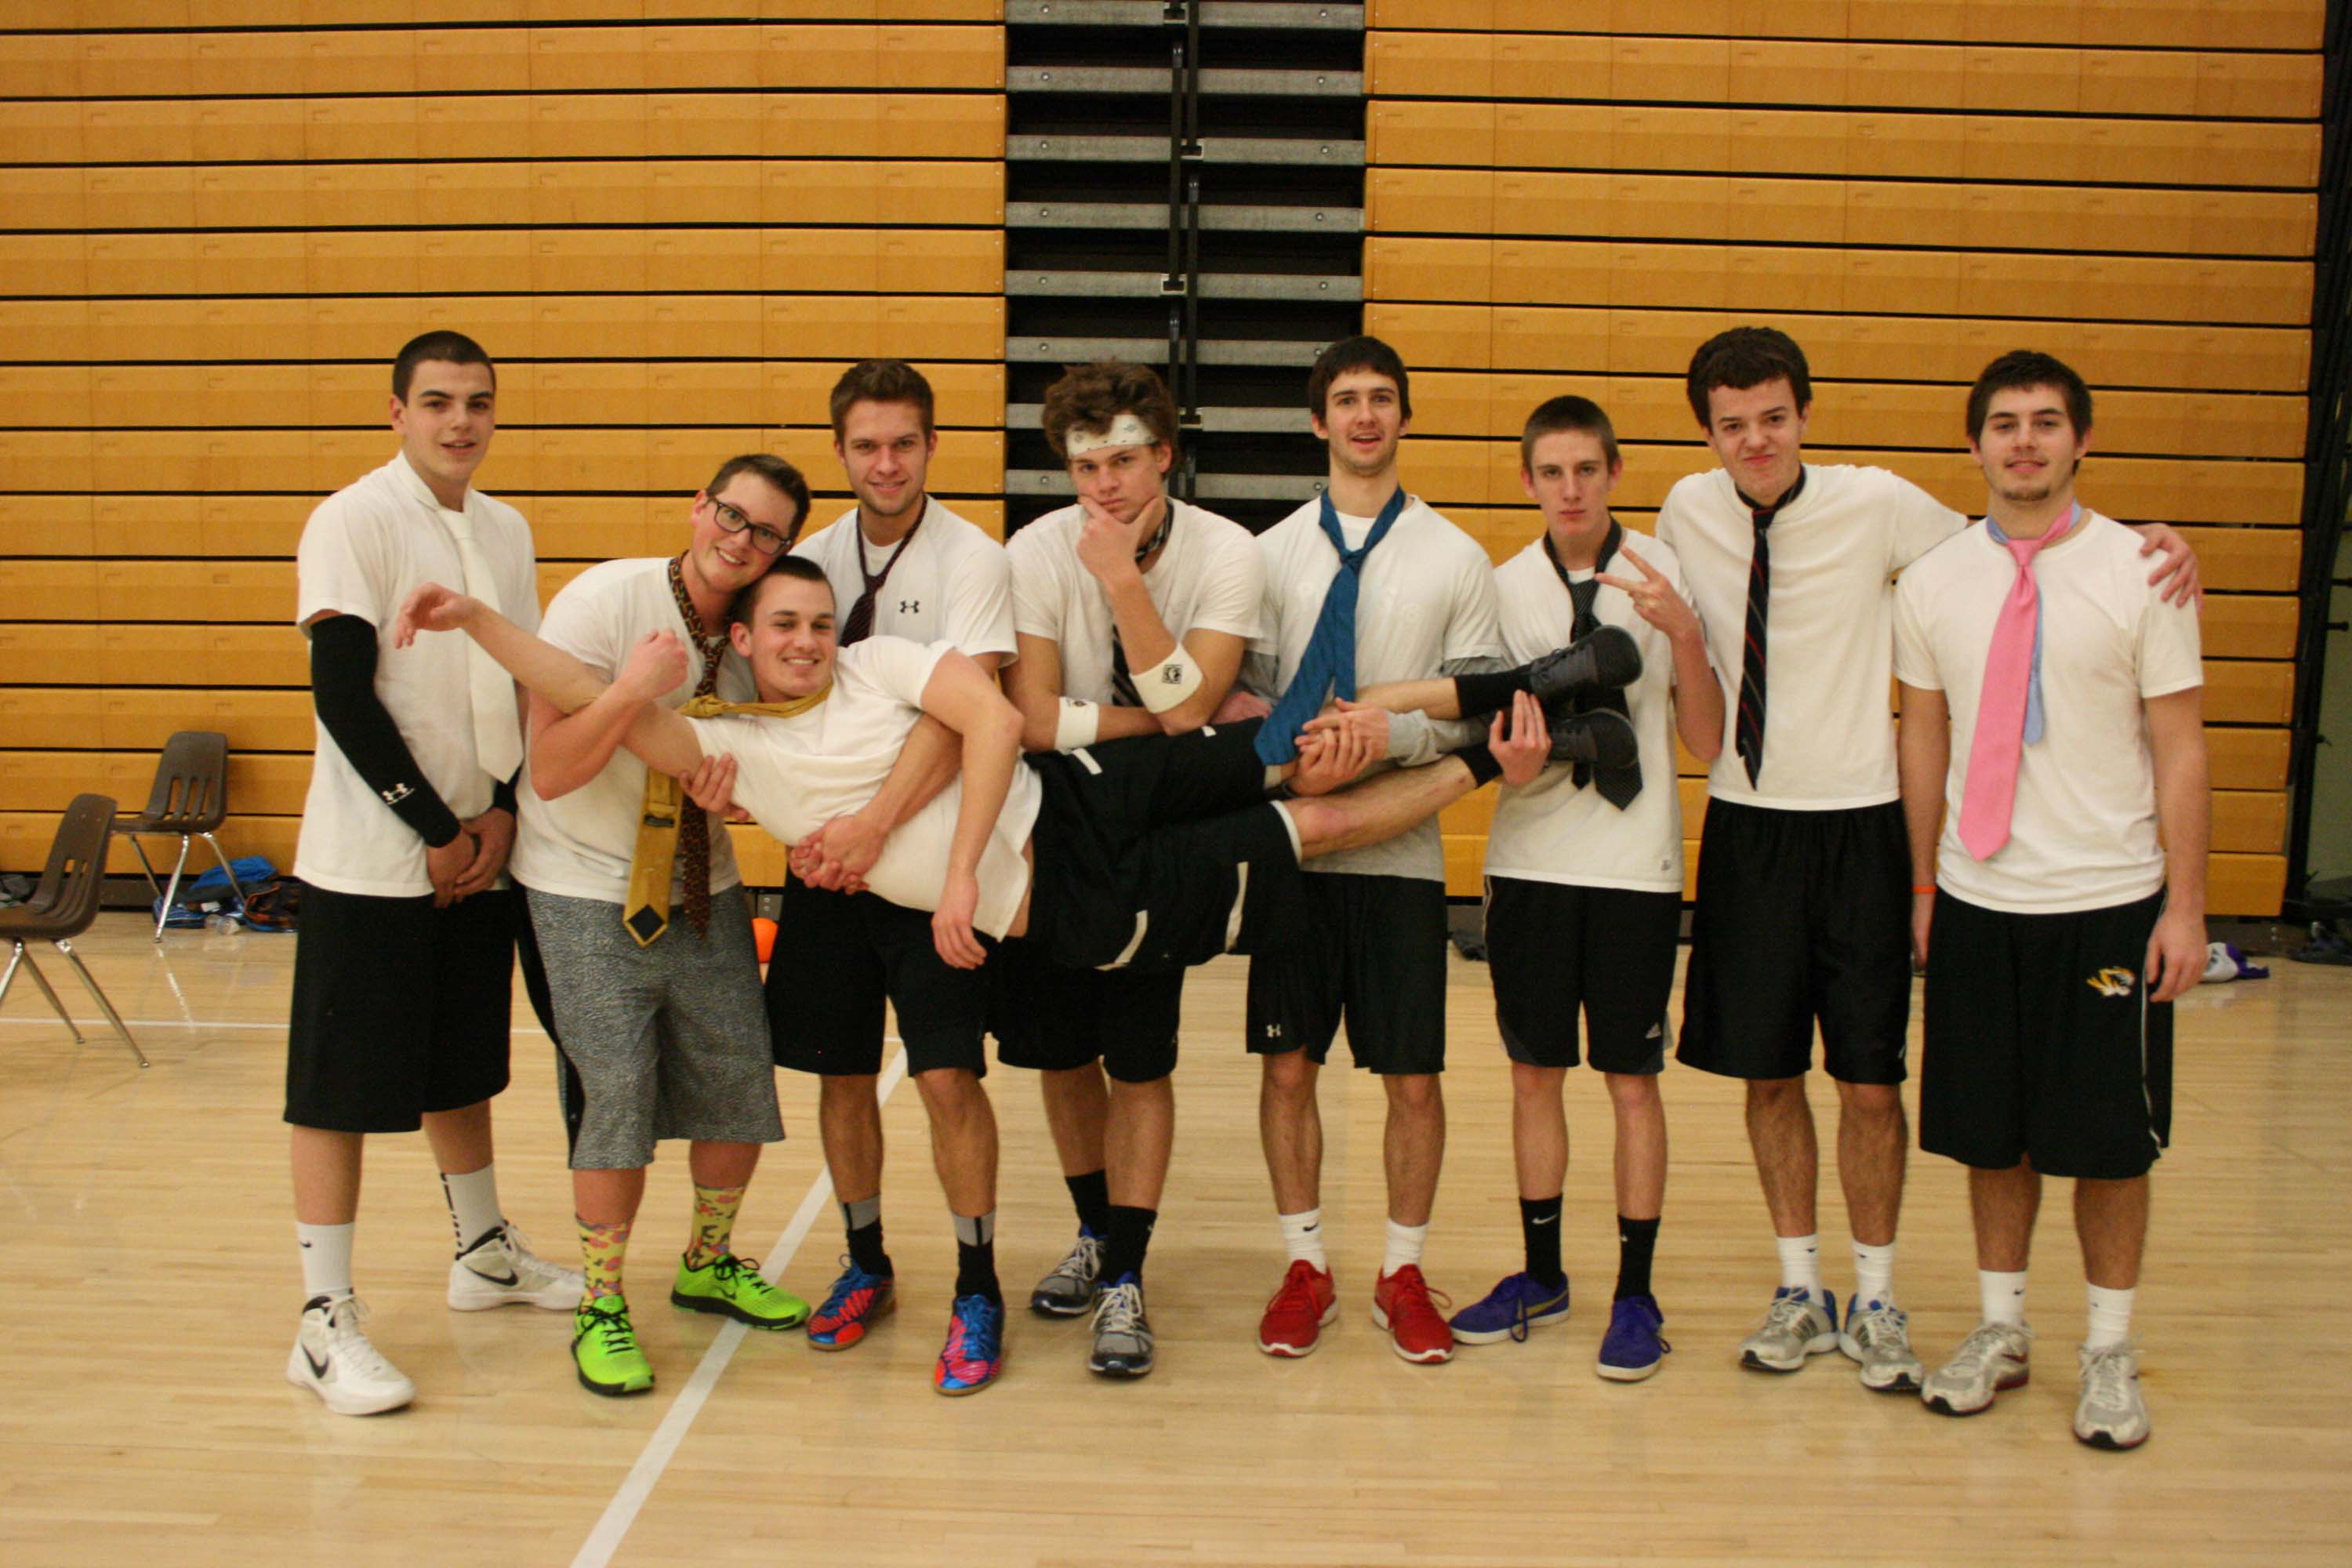 JGwentworth wins style competition at dodgeball competition